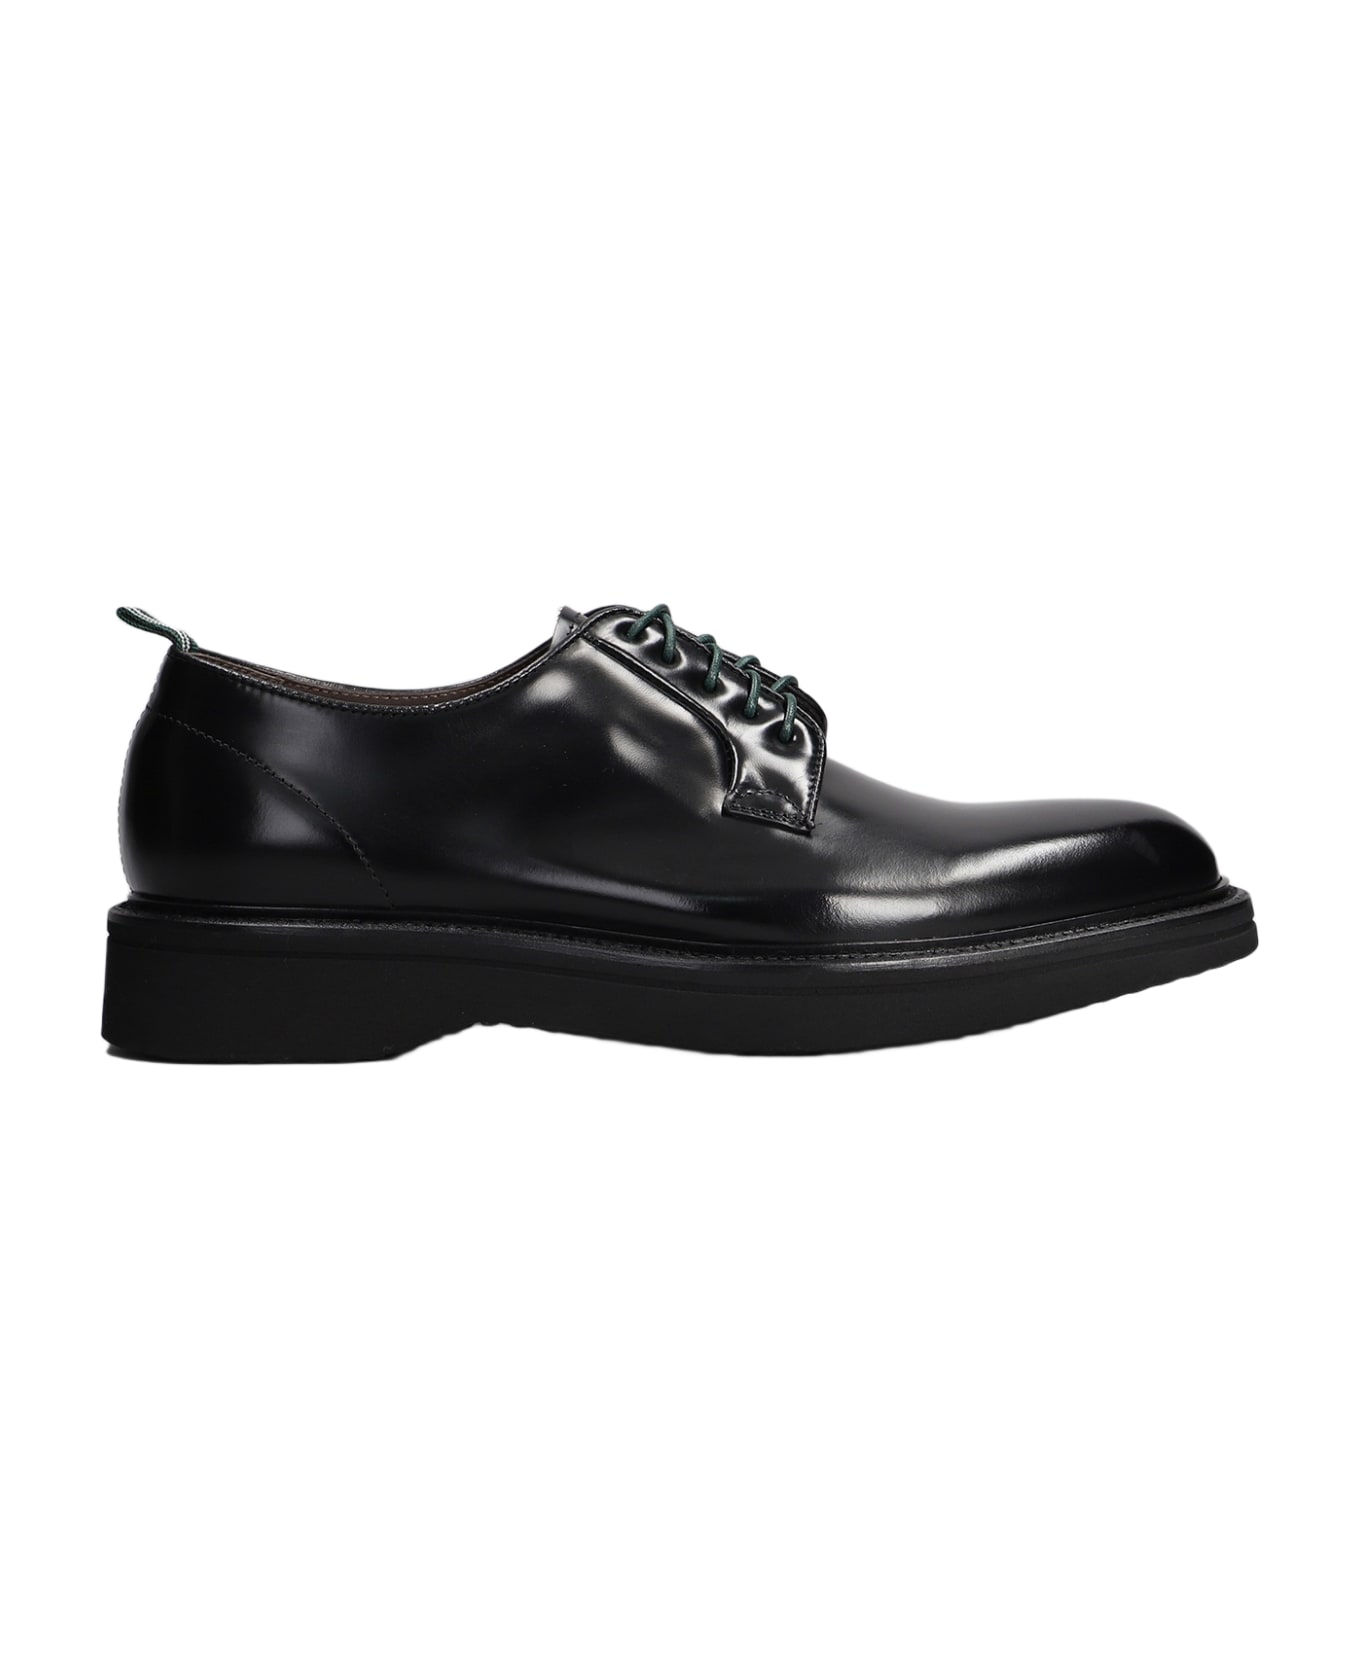 Green George Lace Up Shoes In Black Leather - black